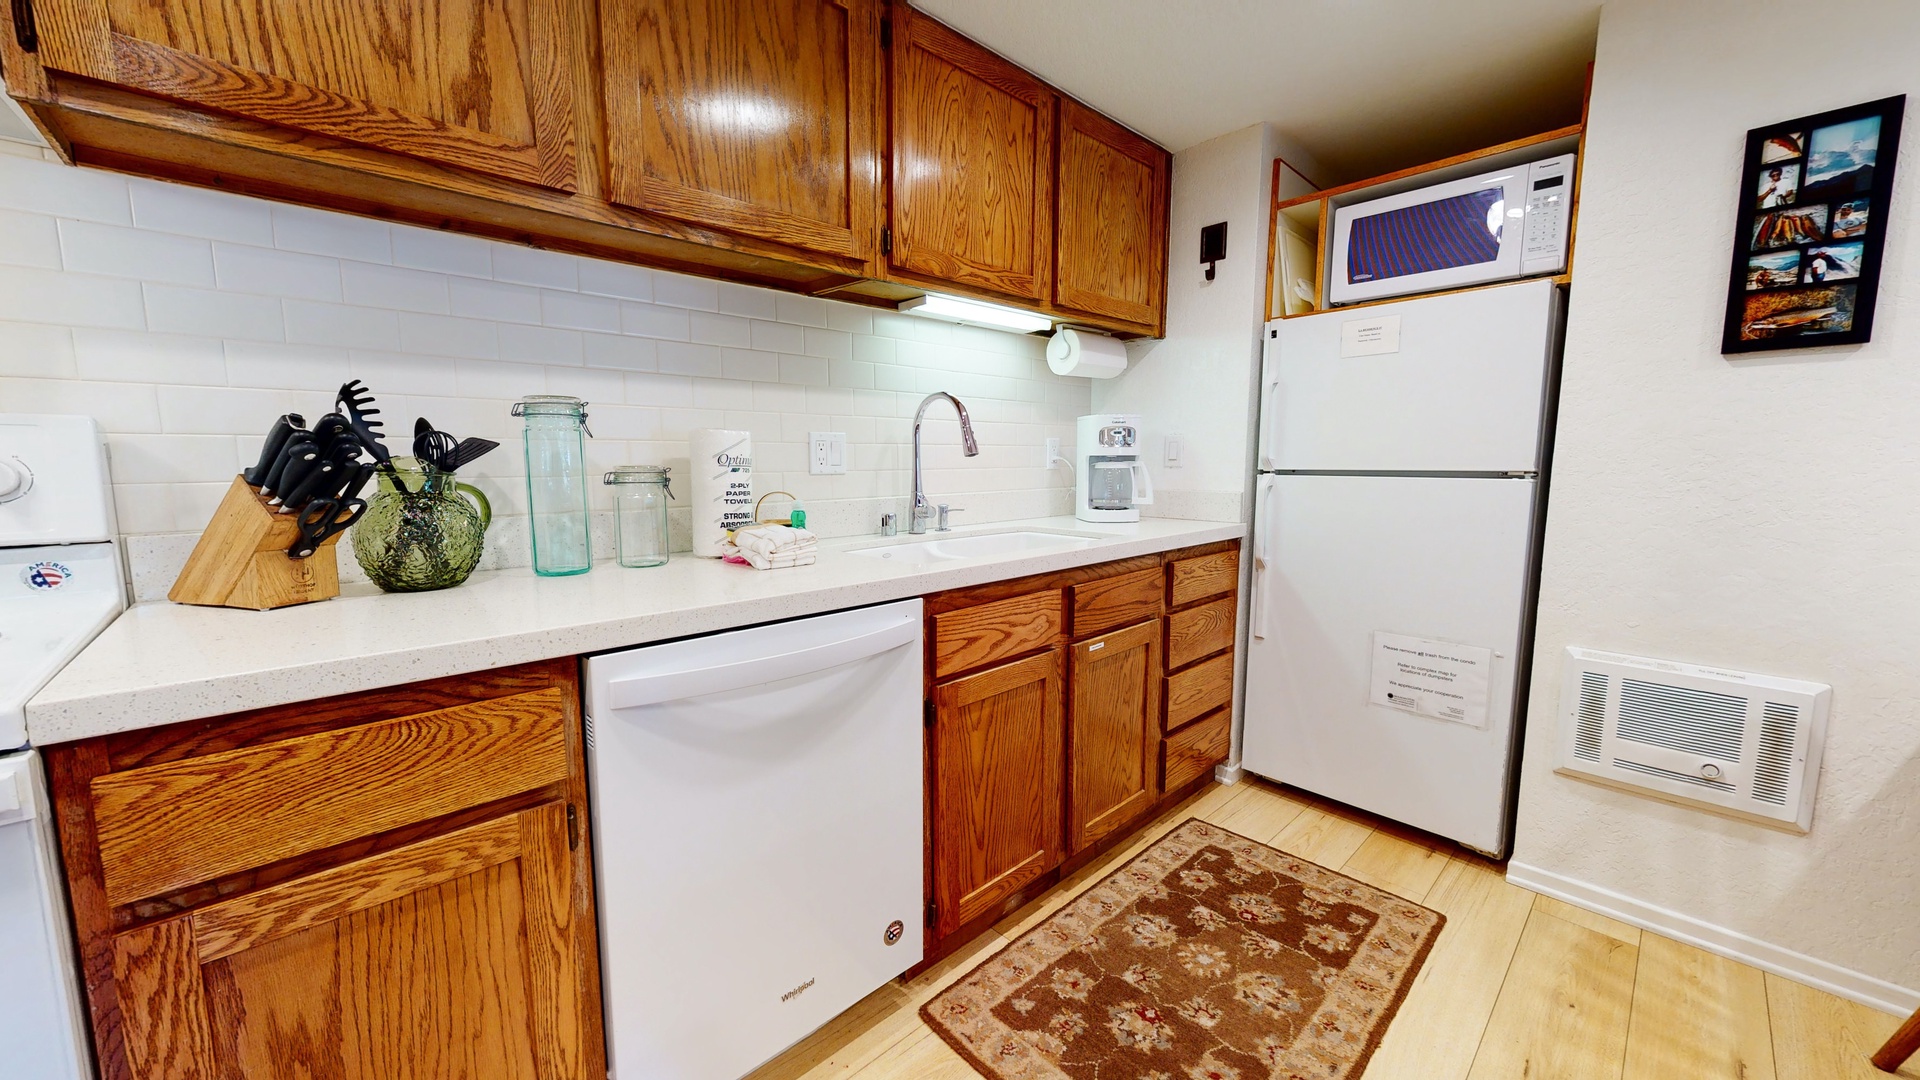 Kitchen with toaster, drip coffee maker, blender, electric stovetop and more